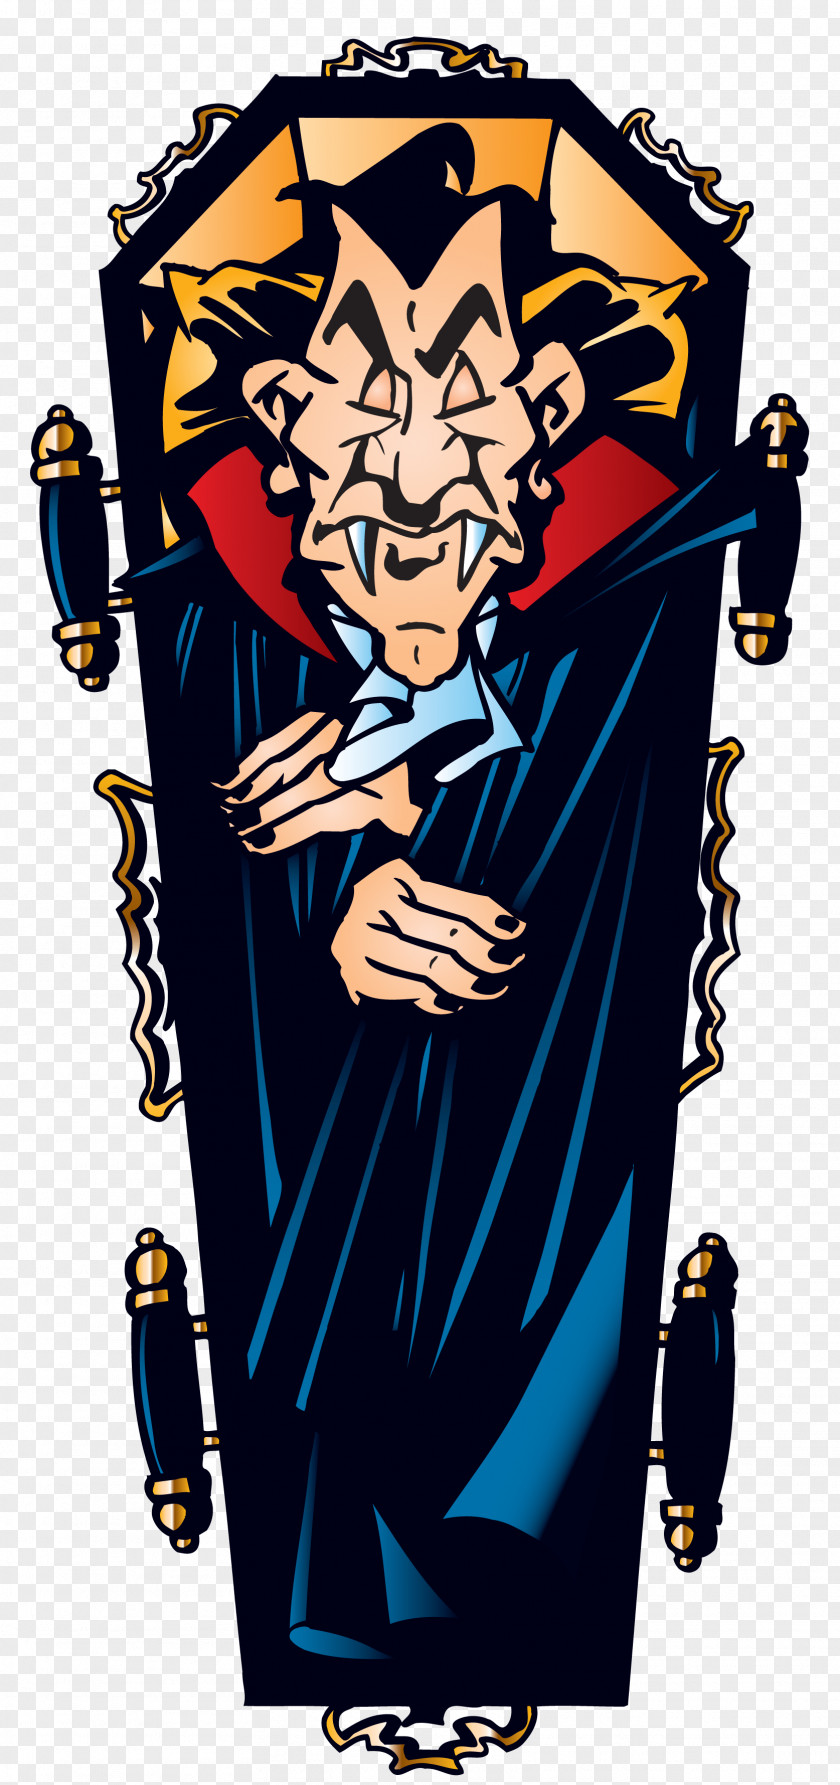 Halloween Vampire In Coffin Clipart Count Dracula Clip Art PNG